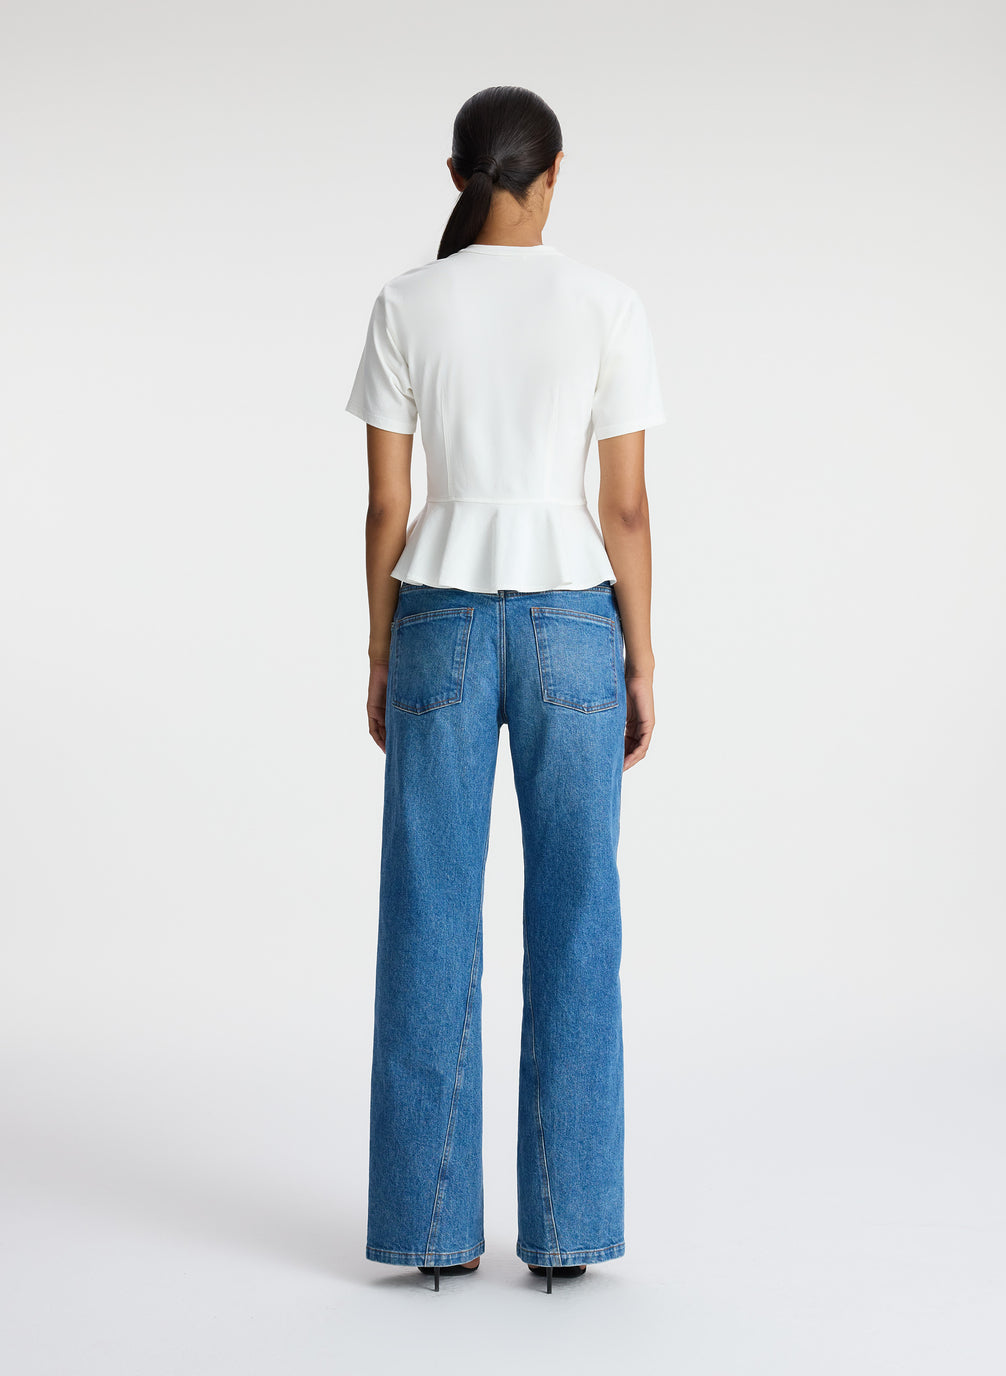 back  view of woman wearing white peplum tee and medium blue jeans